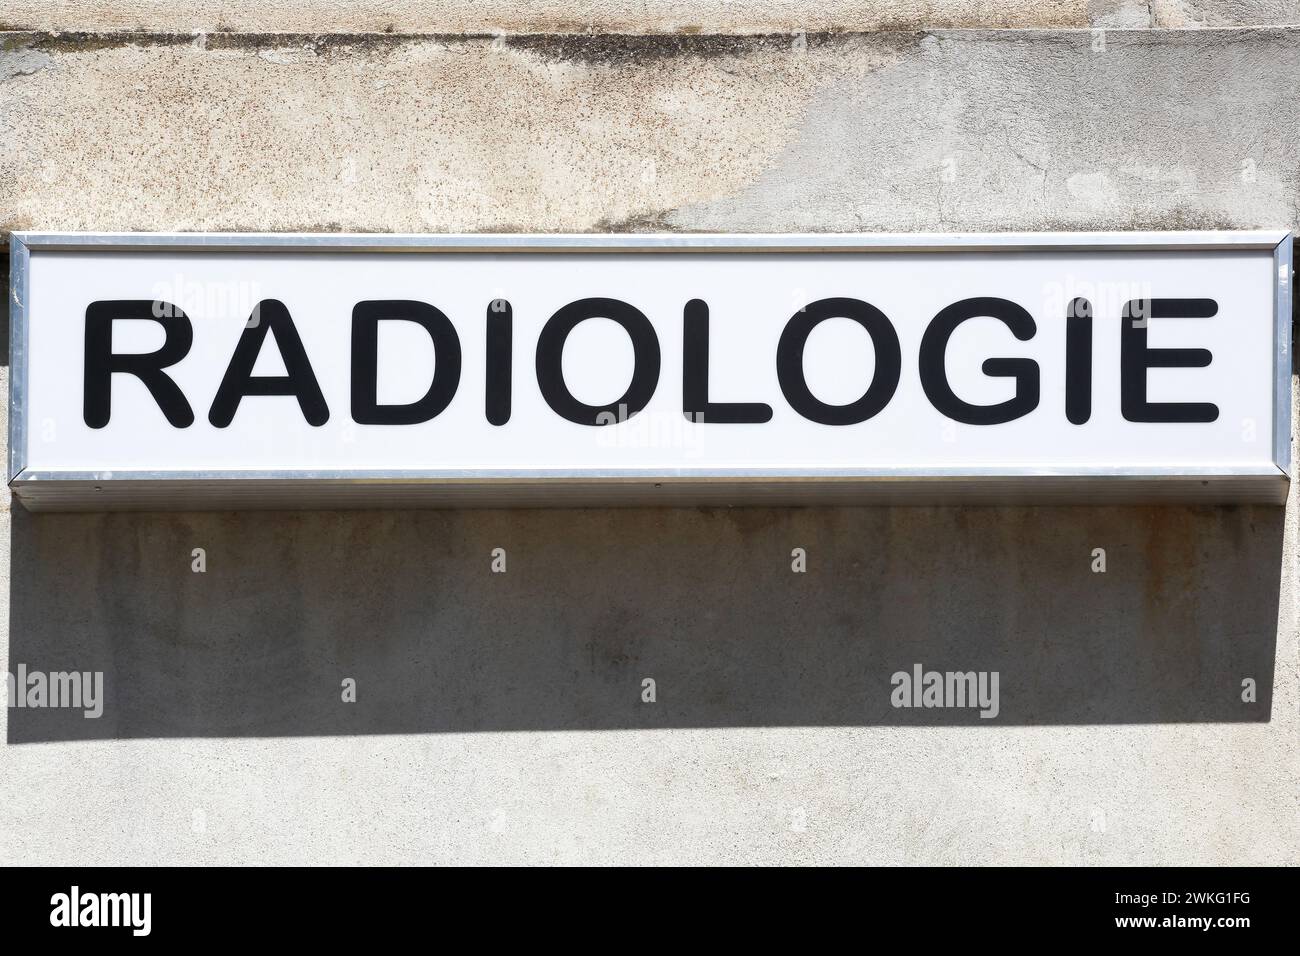 Radiology sign on a wall called radiologie in French language Stock Photo